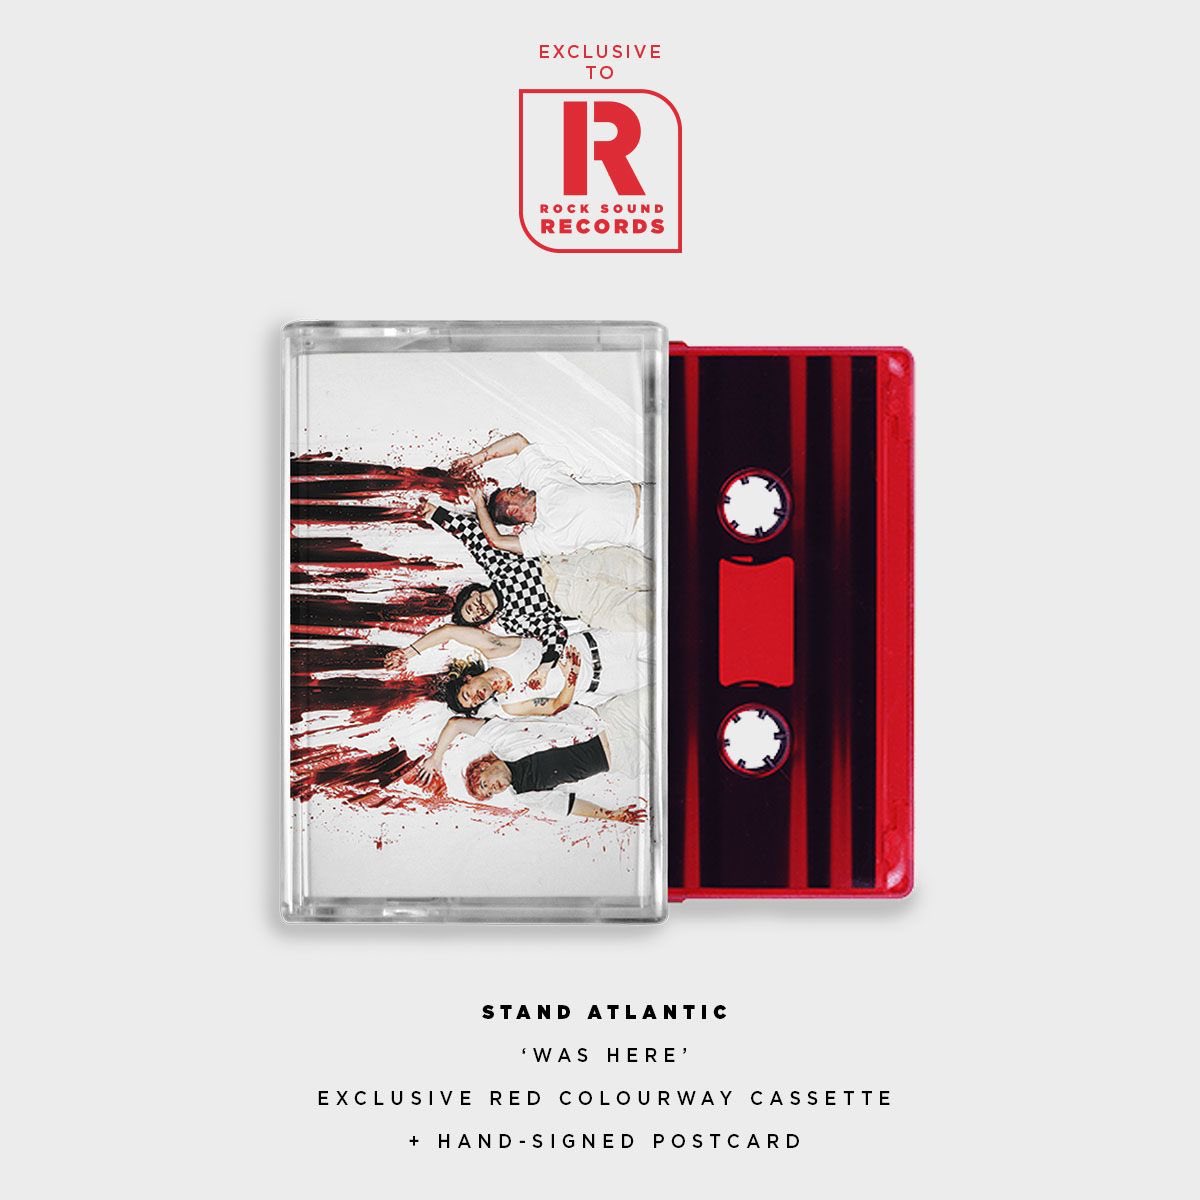 Stand Atlantic’s new album ‘WAS HERE’ Limited edition red cassette Plus a hand-signed postcard Only at shop.rocksound.tv/products/stand…